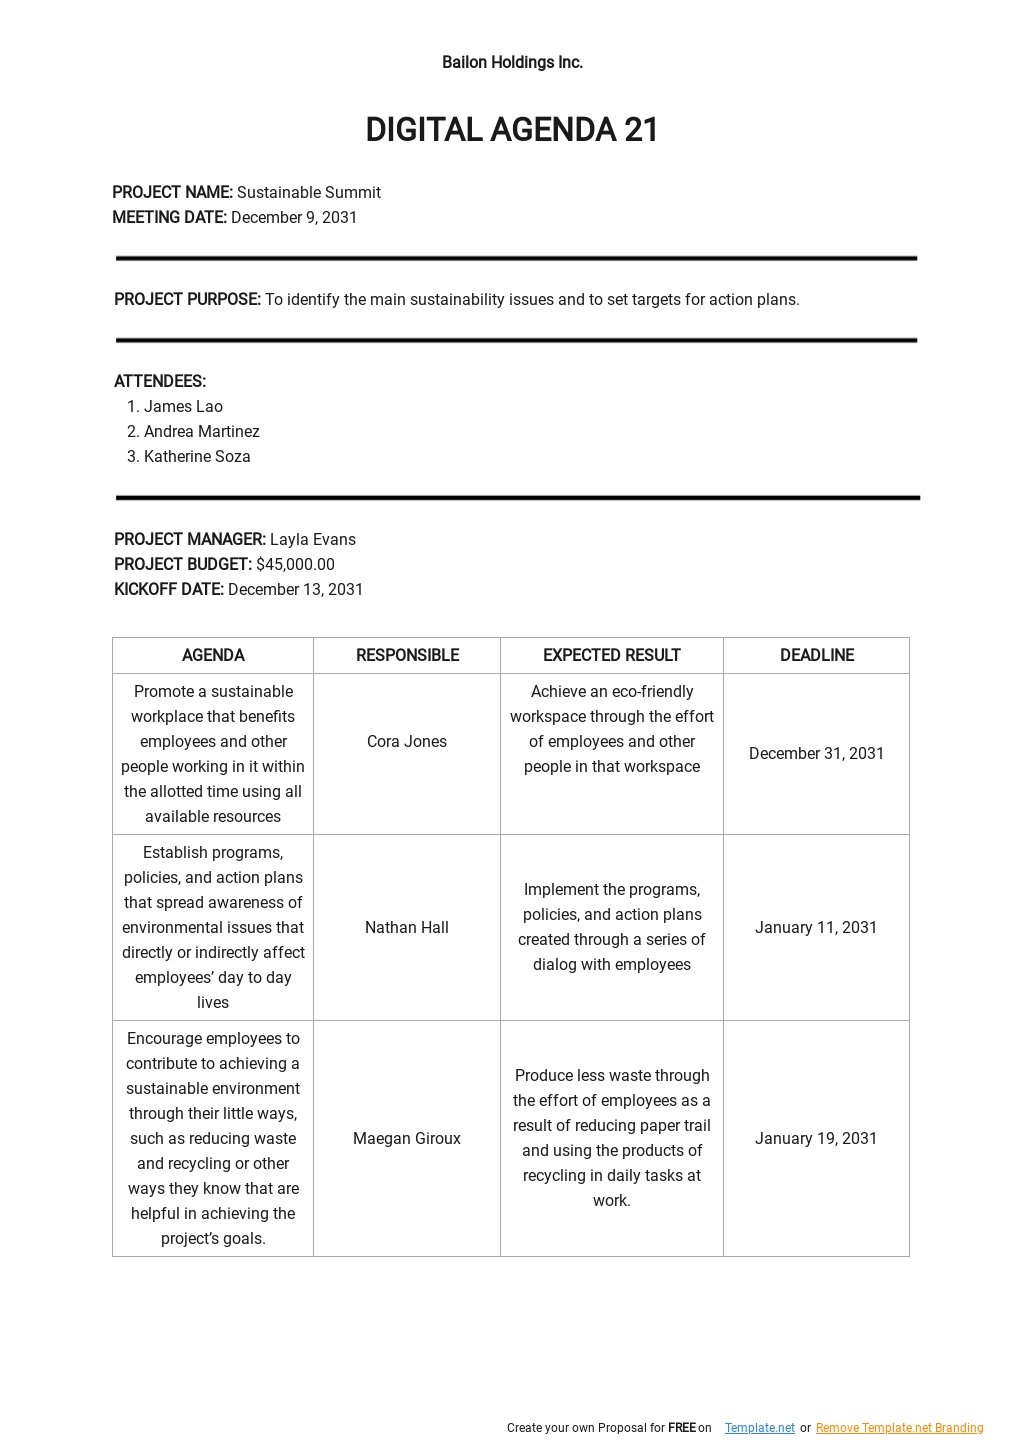 Digital Agenda 21 Template in Word, Google Docs, Apple Pages